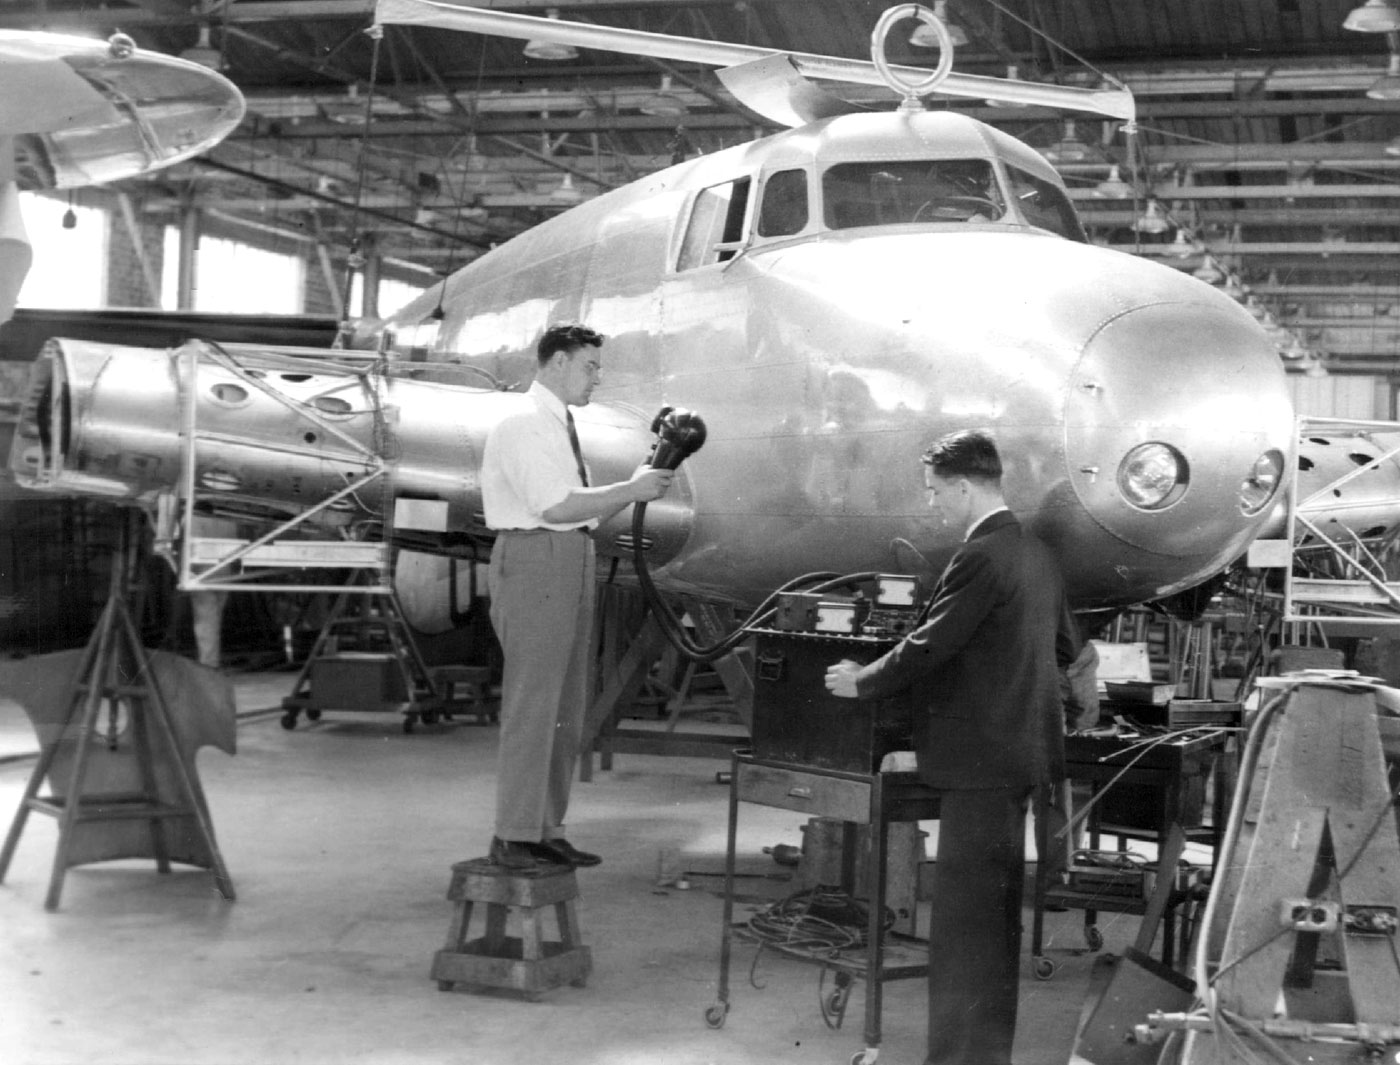 Lockheed engineers use X-ray equipment to scan for hidden damage while the Electra undergoes repairs at Lockheed Aircraft Company, Burbank, California, May 1937.